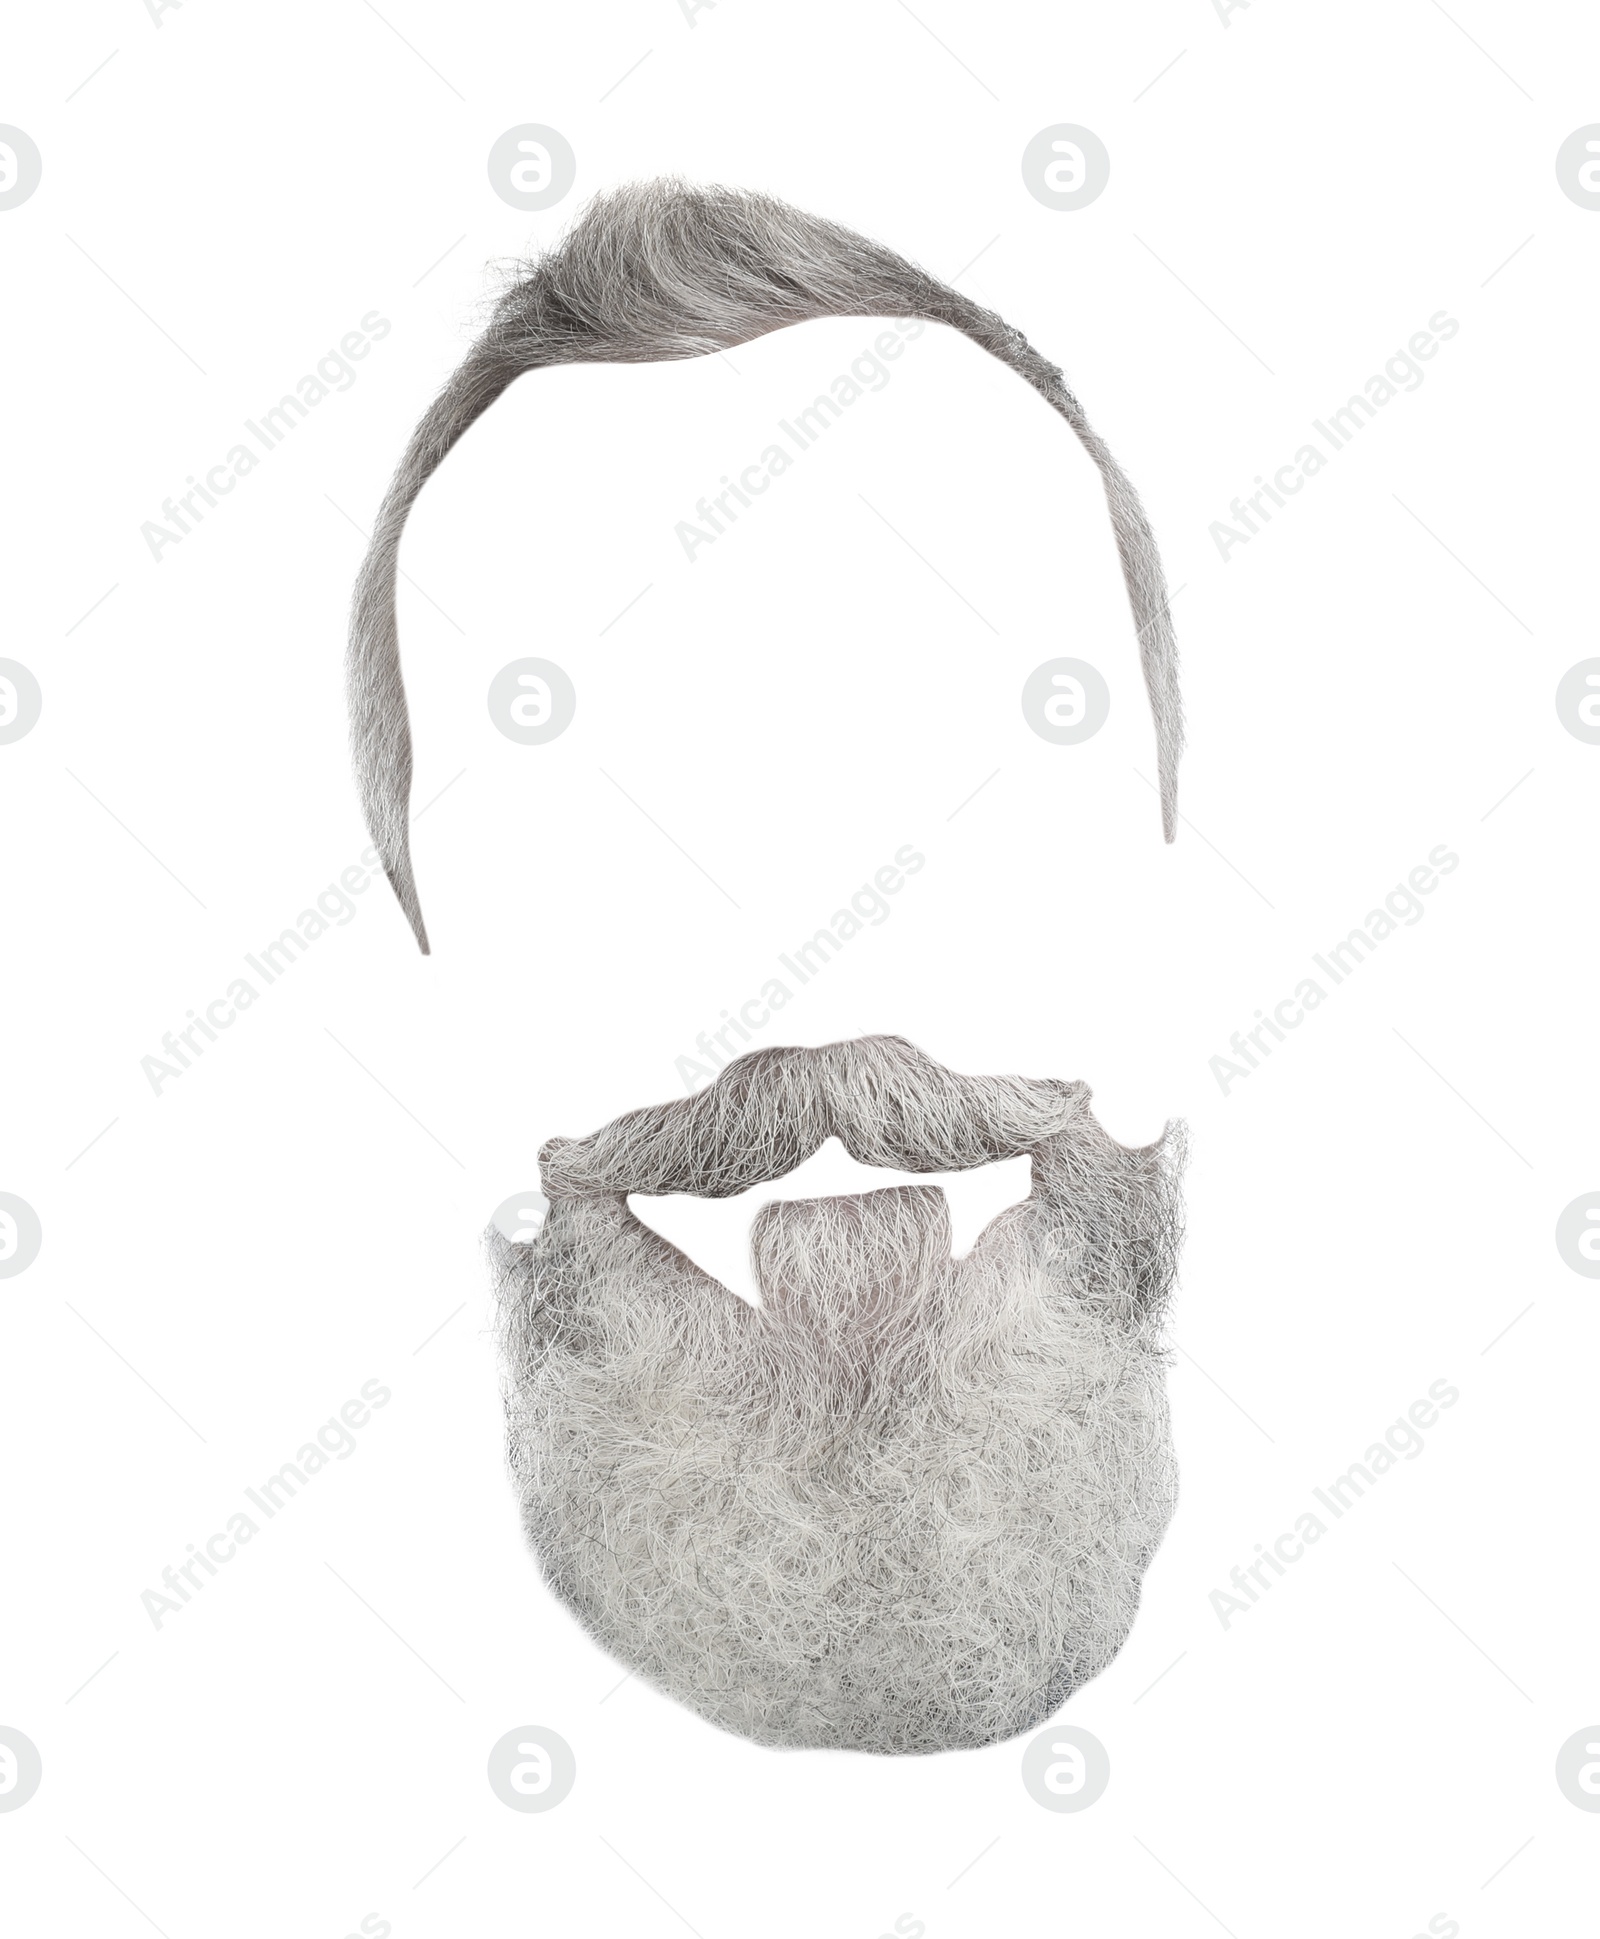 Image of Fashionable men's hairstyle and beard isolated on white. Image for design